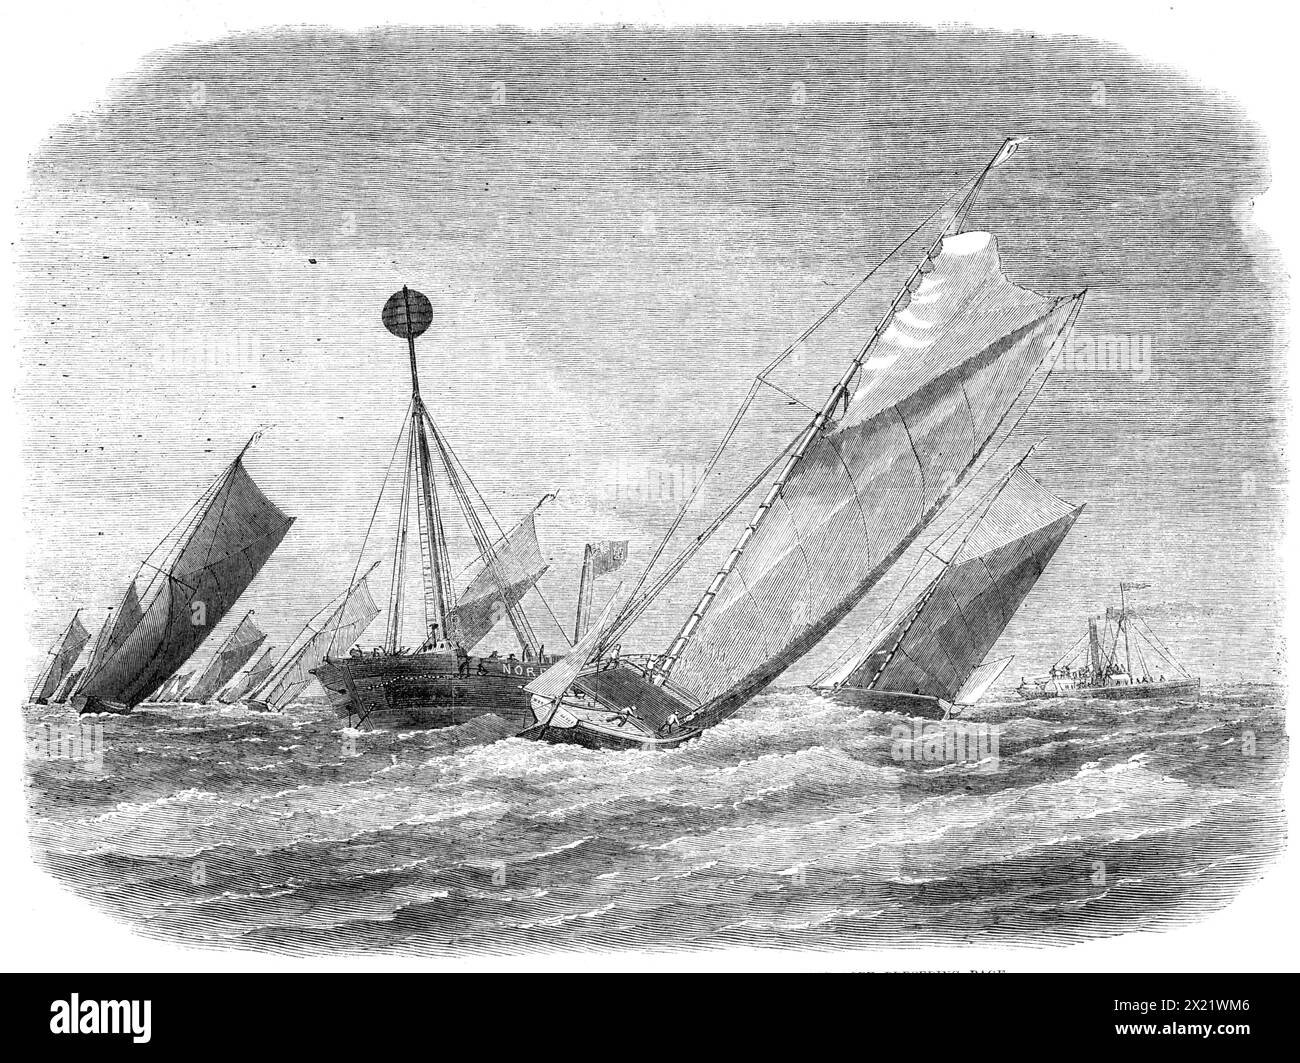 Sailing-barge on the Thames: rounding the Nore Light-ship, 1865. 'The third annual sailing-barge match took place under the management of...the Thames and Medway General Craft-owner's Association...the course being from Erith to the Nore Lightship and back. Three prizes, the highest being a cup of the value of &#xa3;18, with ten guineas divided among the crew, were offered for the topsail barges; and three prizes, of rather less value, for the stump-rigged barges...The barges started from Erith a few minutes before eleven...with a spanking breeze from the south, and a little rain; the wind, th Stock Photo